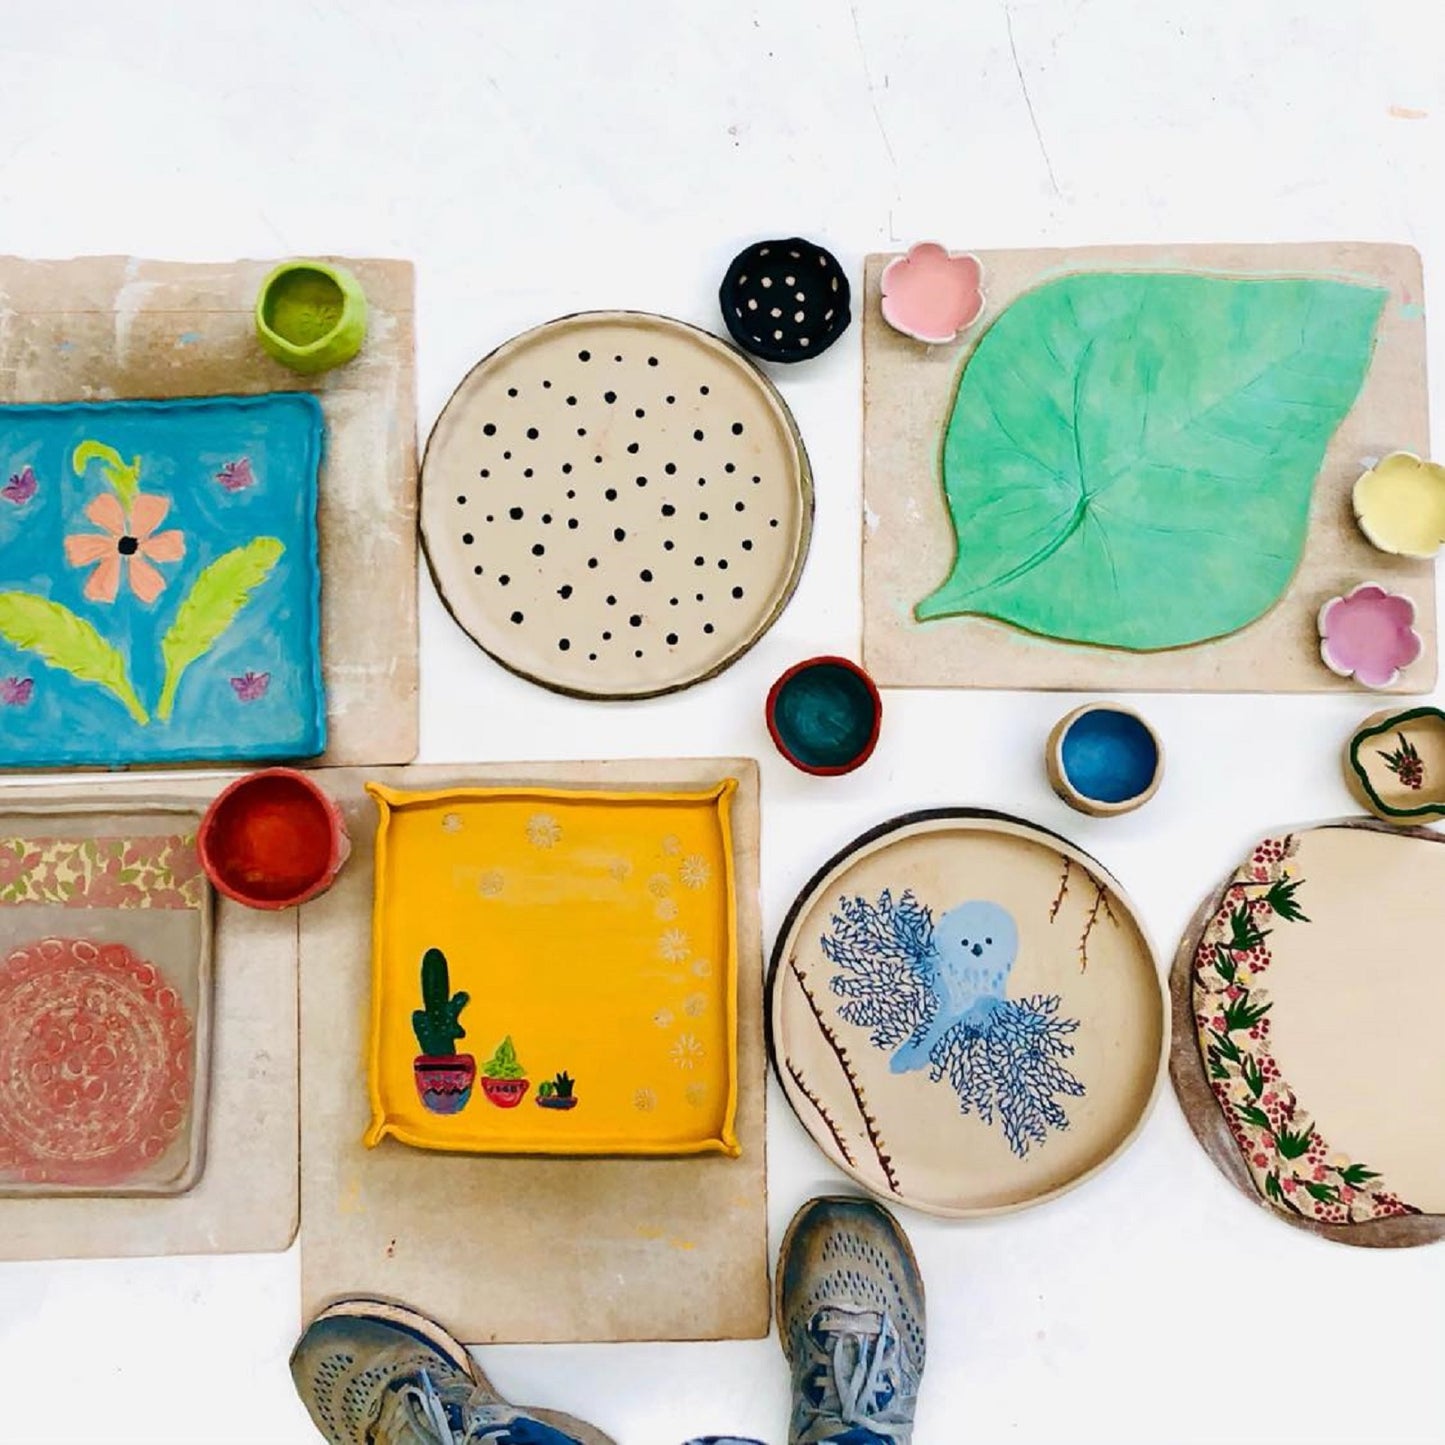 Create you own hand built Pottery Platter and Dip Bowl -  Sat 11th Nov 1-3pm